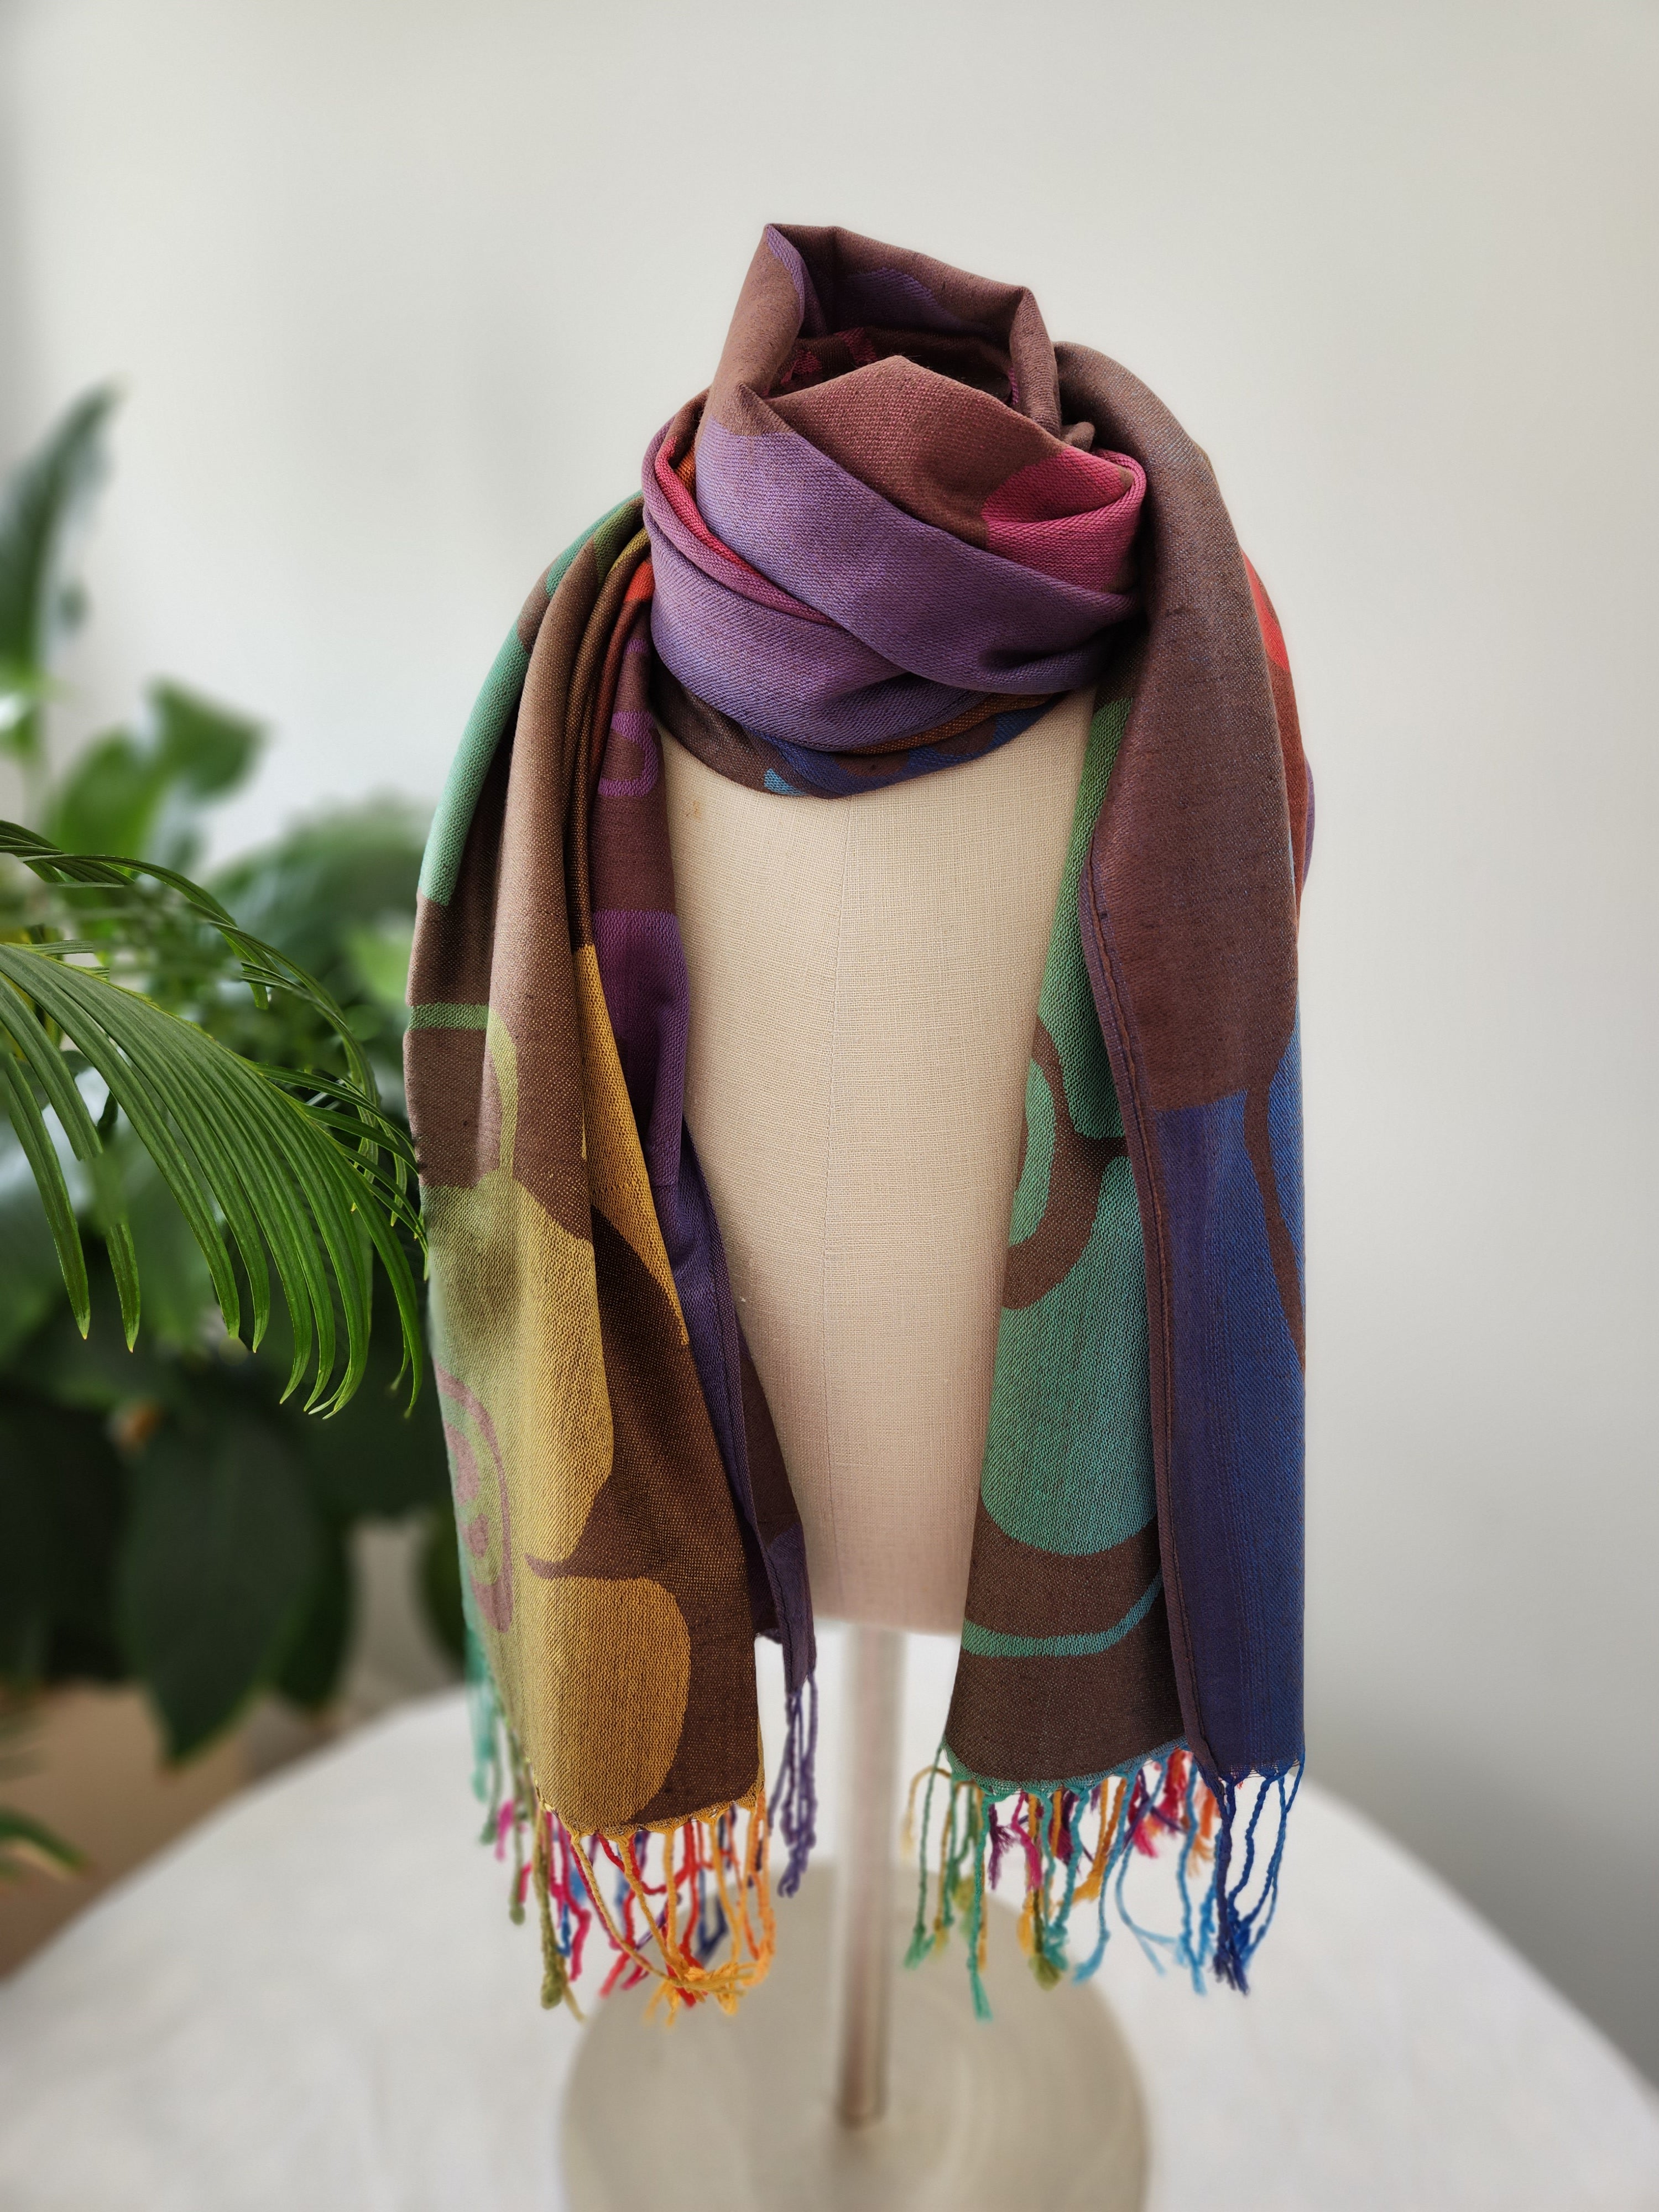 Buy coffee Colorful Women&#39;s Scarf in Vibrant, Tropical Colors Makes A Great Holiday Gift